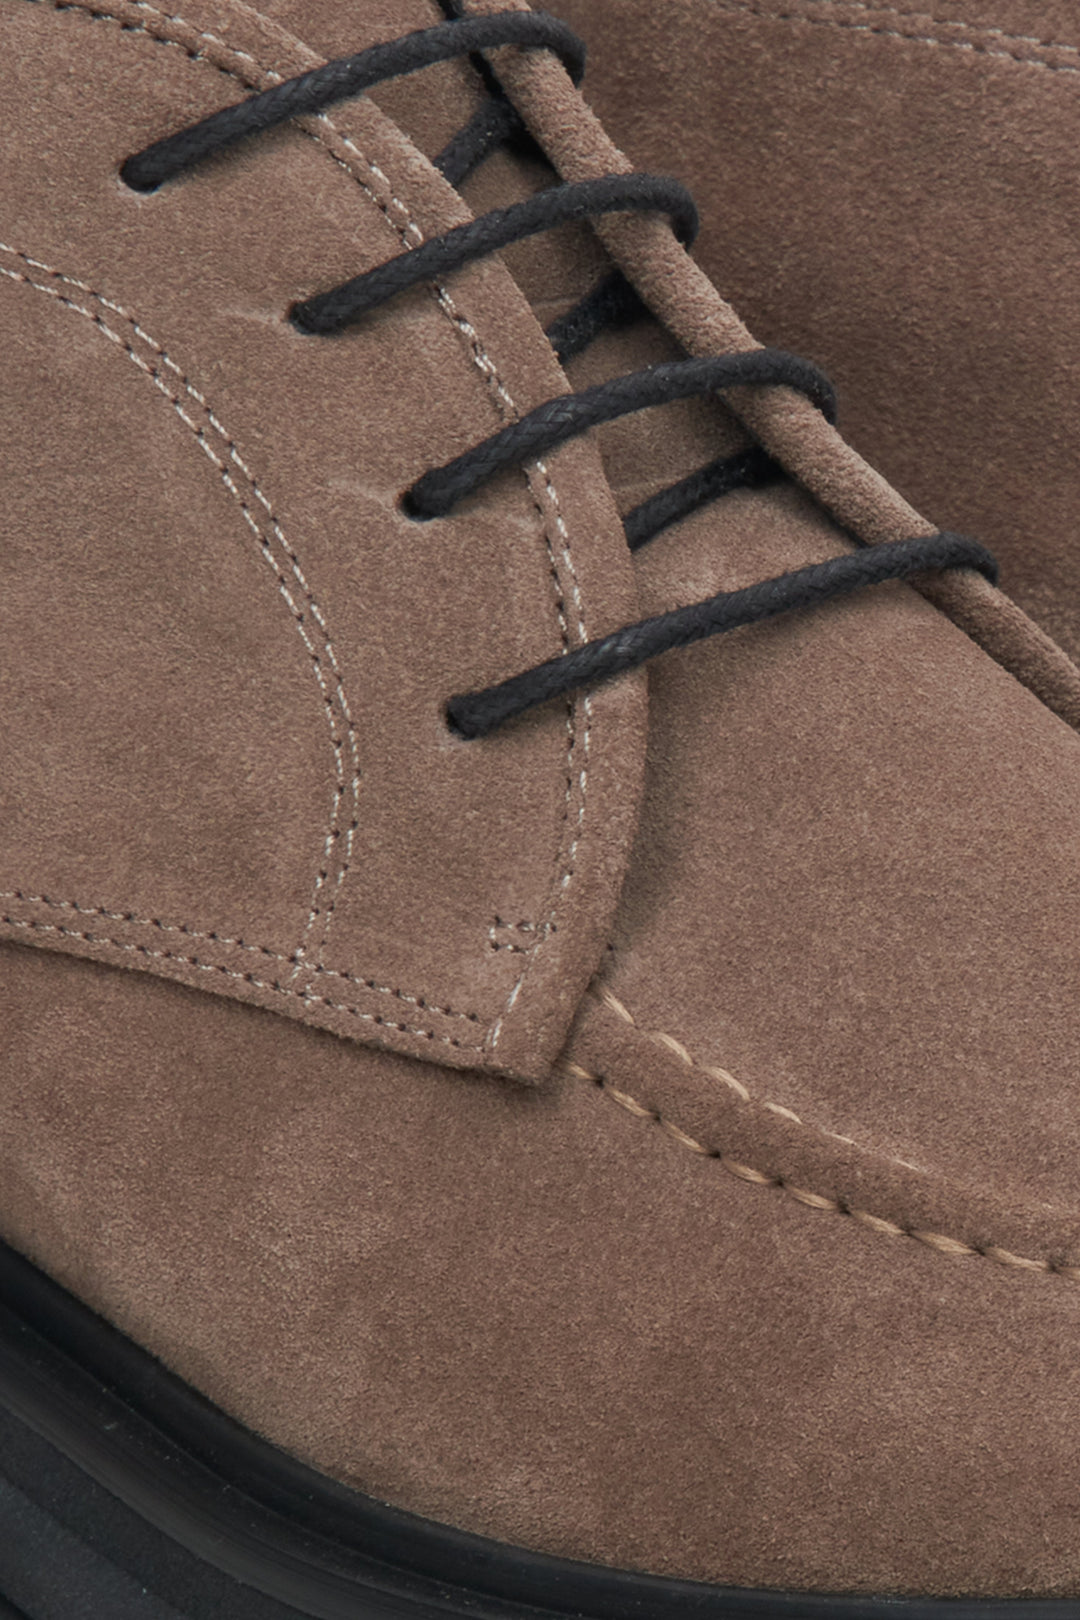 Women's lace-up brown suede boots by Estro - close-up on the detail.